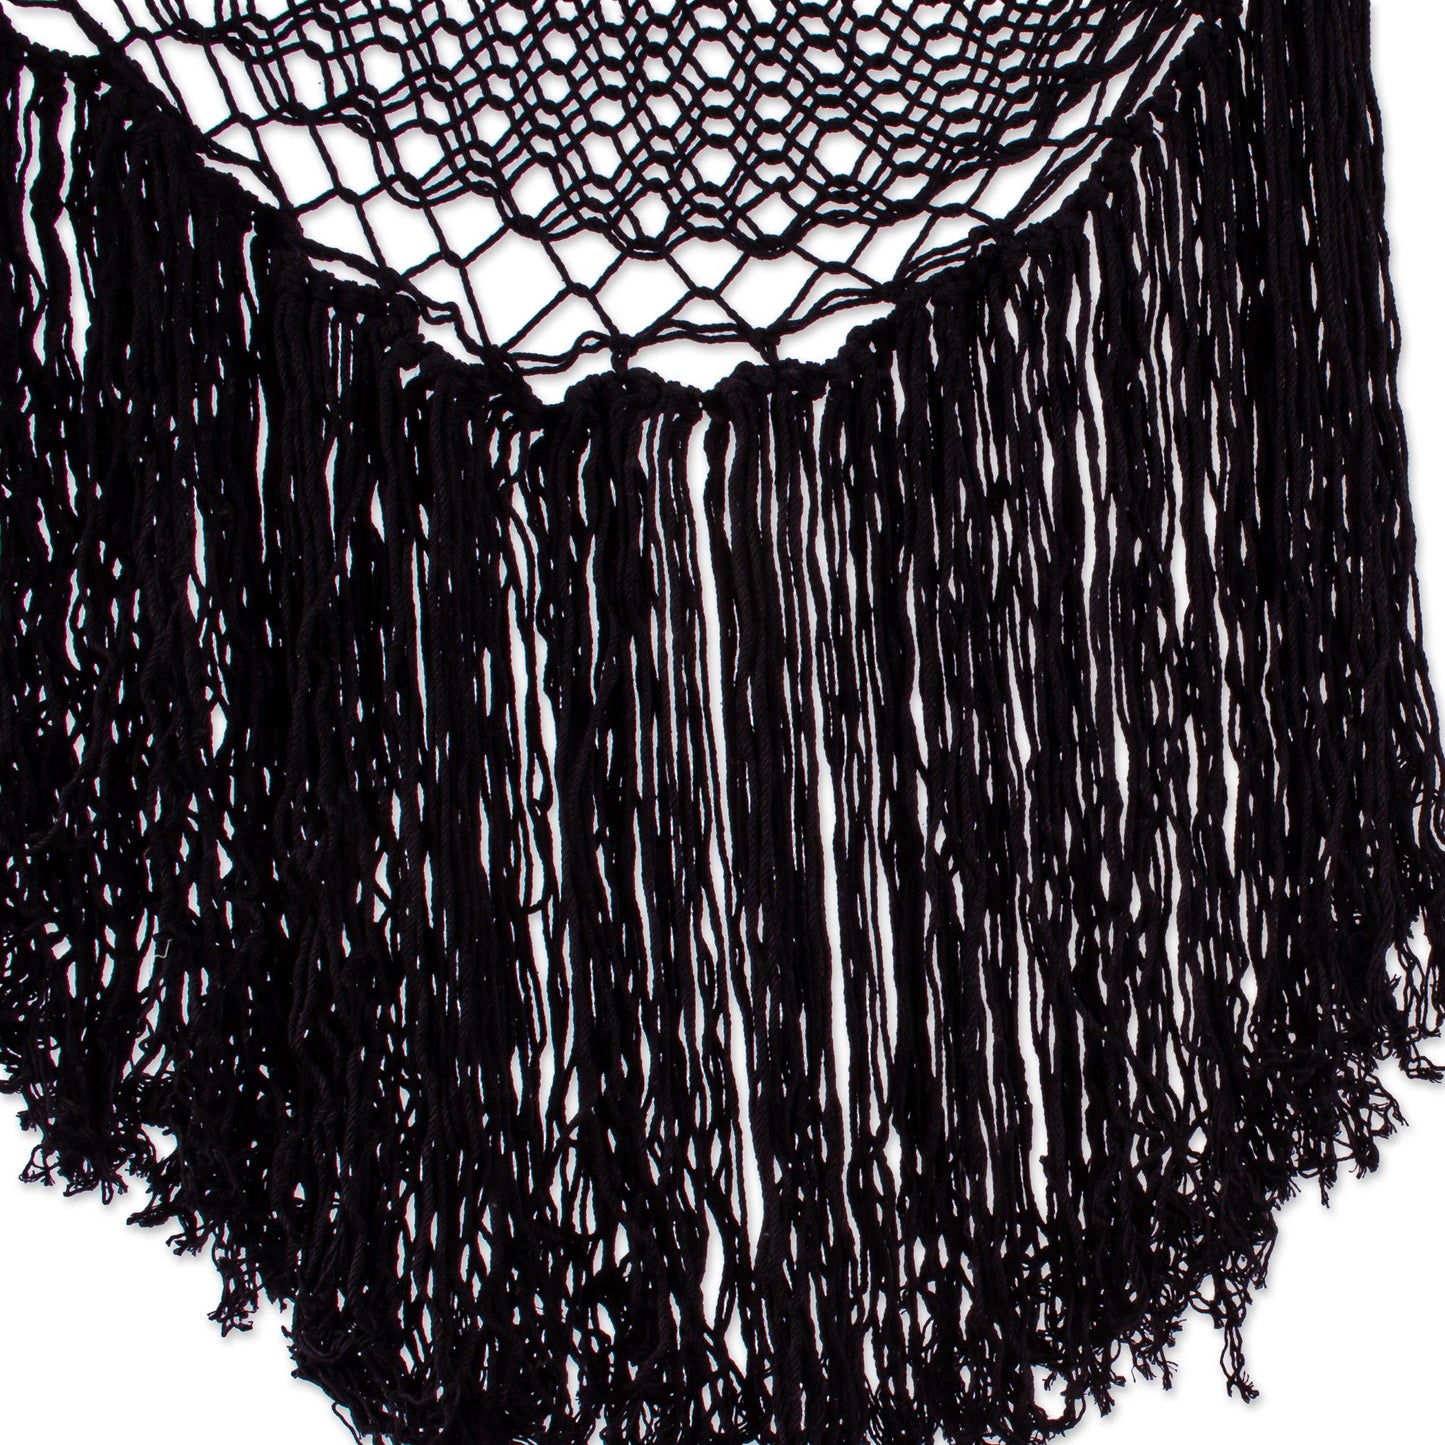 Sea Breezes in Black Black Fringed Cotton Rope Mayan Hammock Swing from Mexico